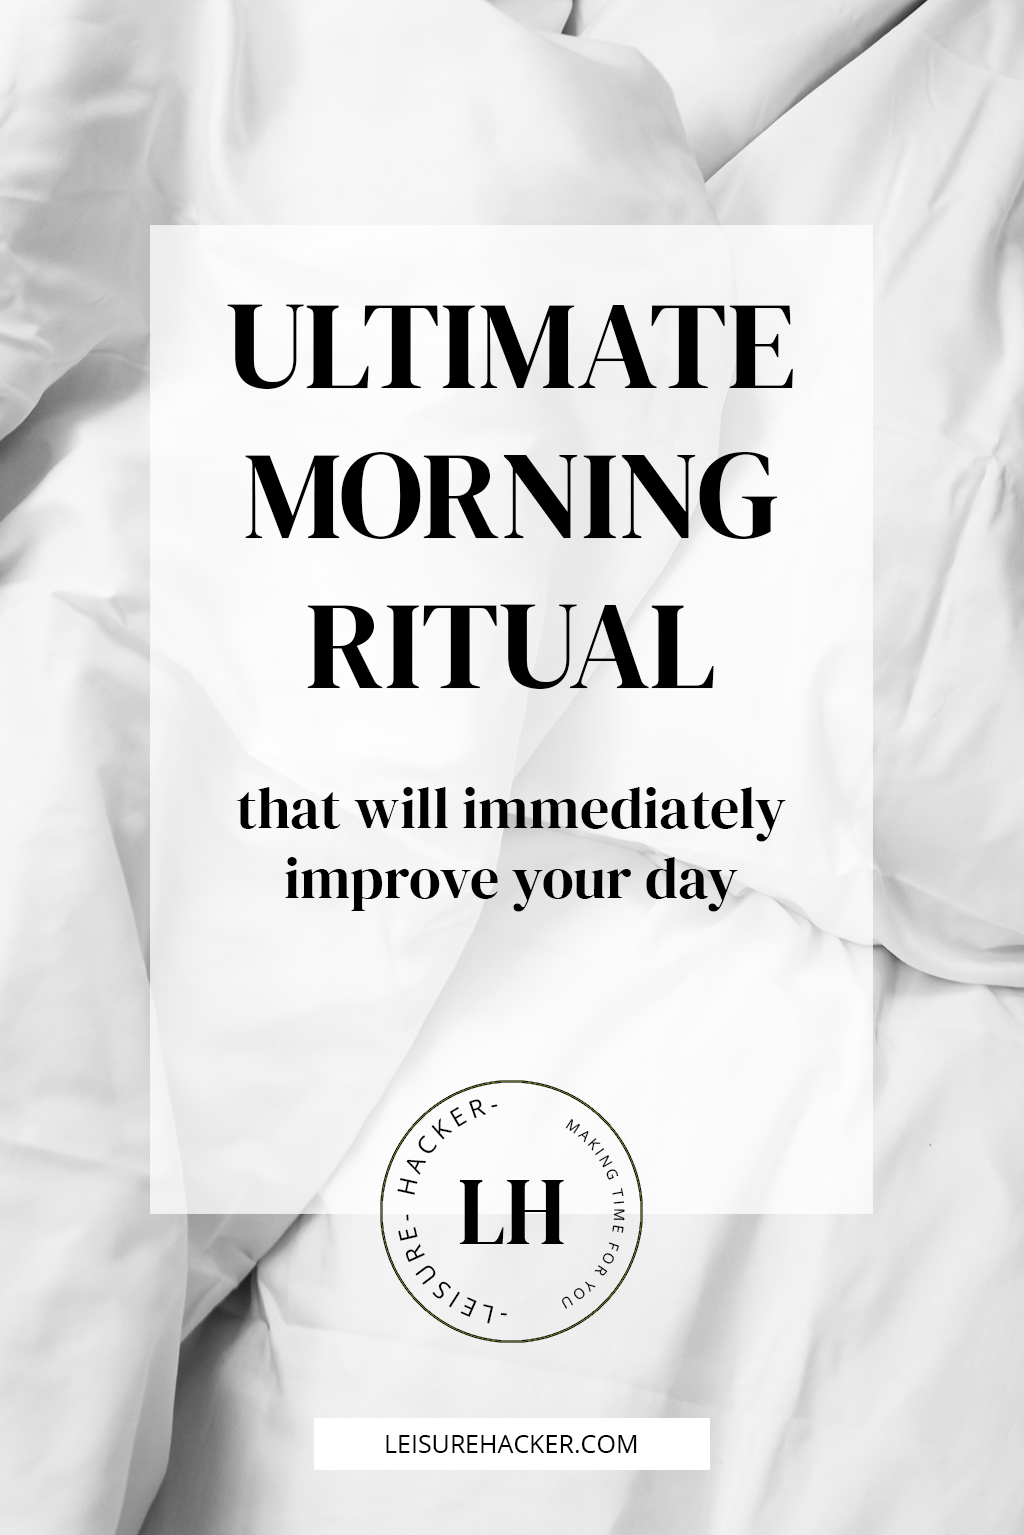 Ultimate morning ritual that will immediately improve your day